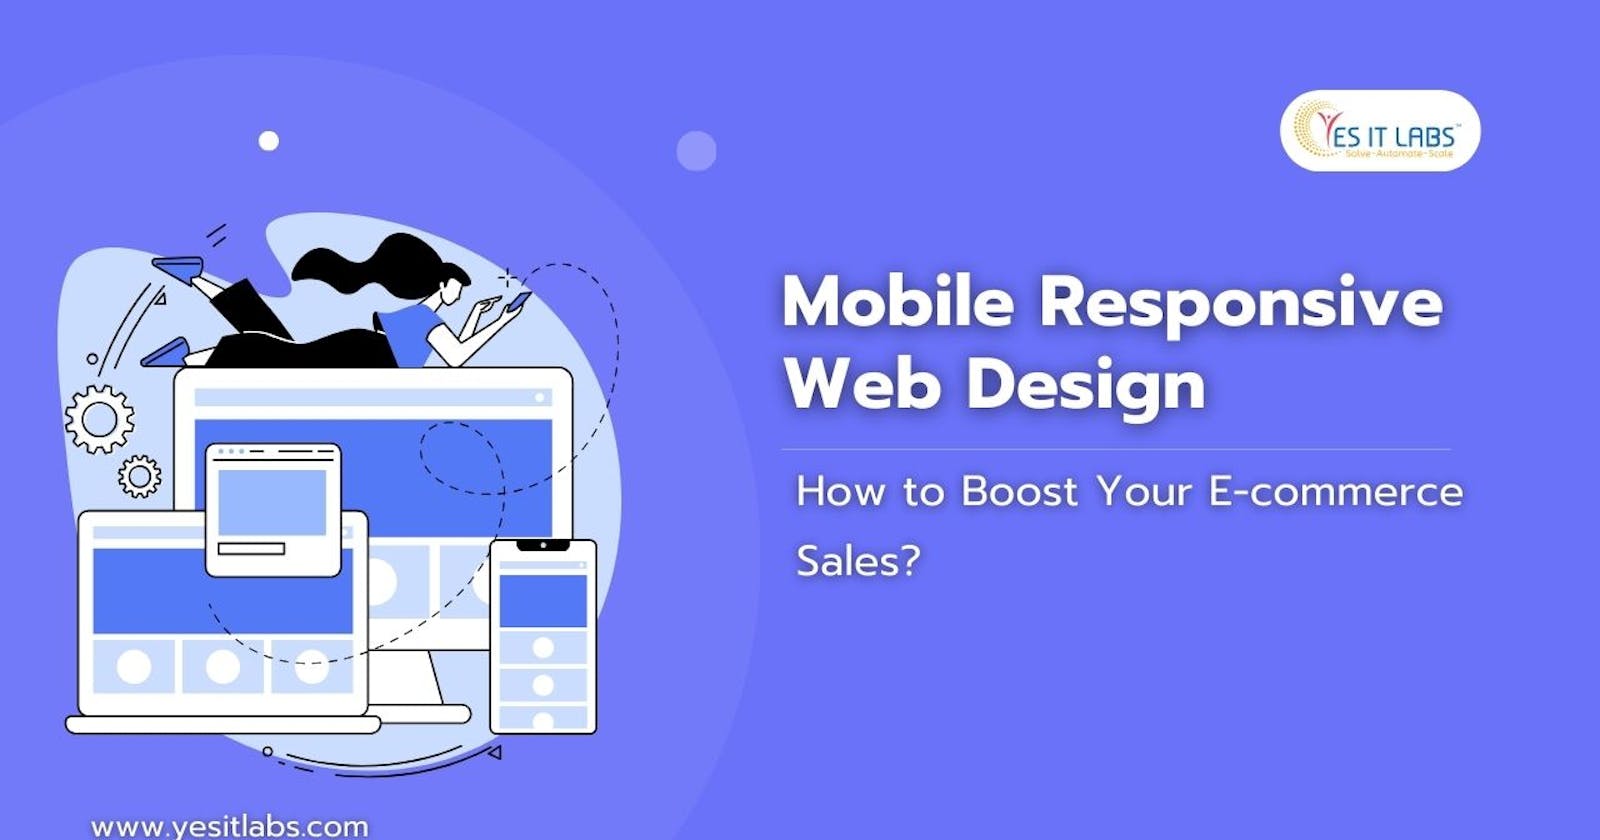 How to Boost Your E-commerce Sales with Mobile Responsive Web Design